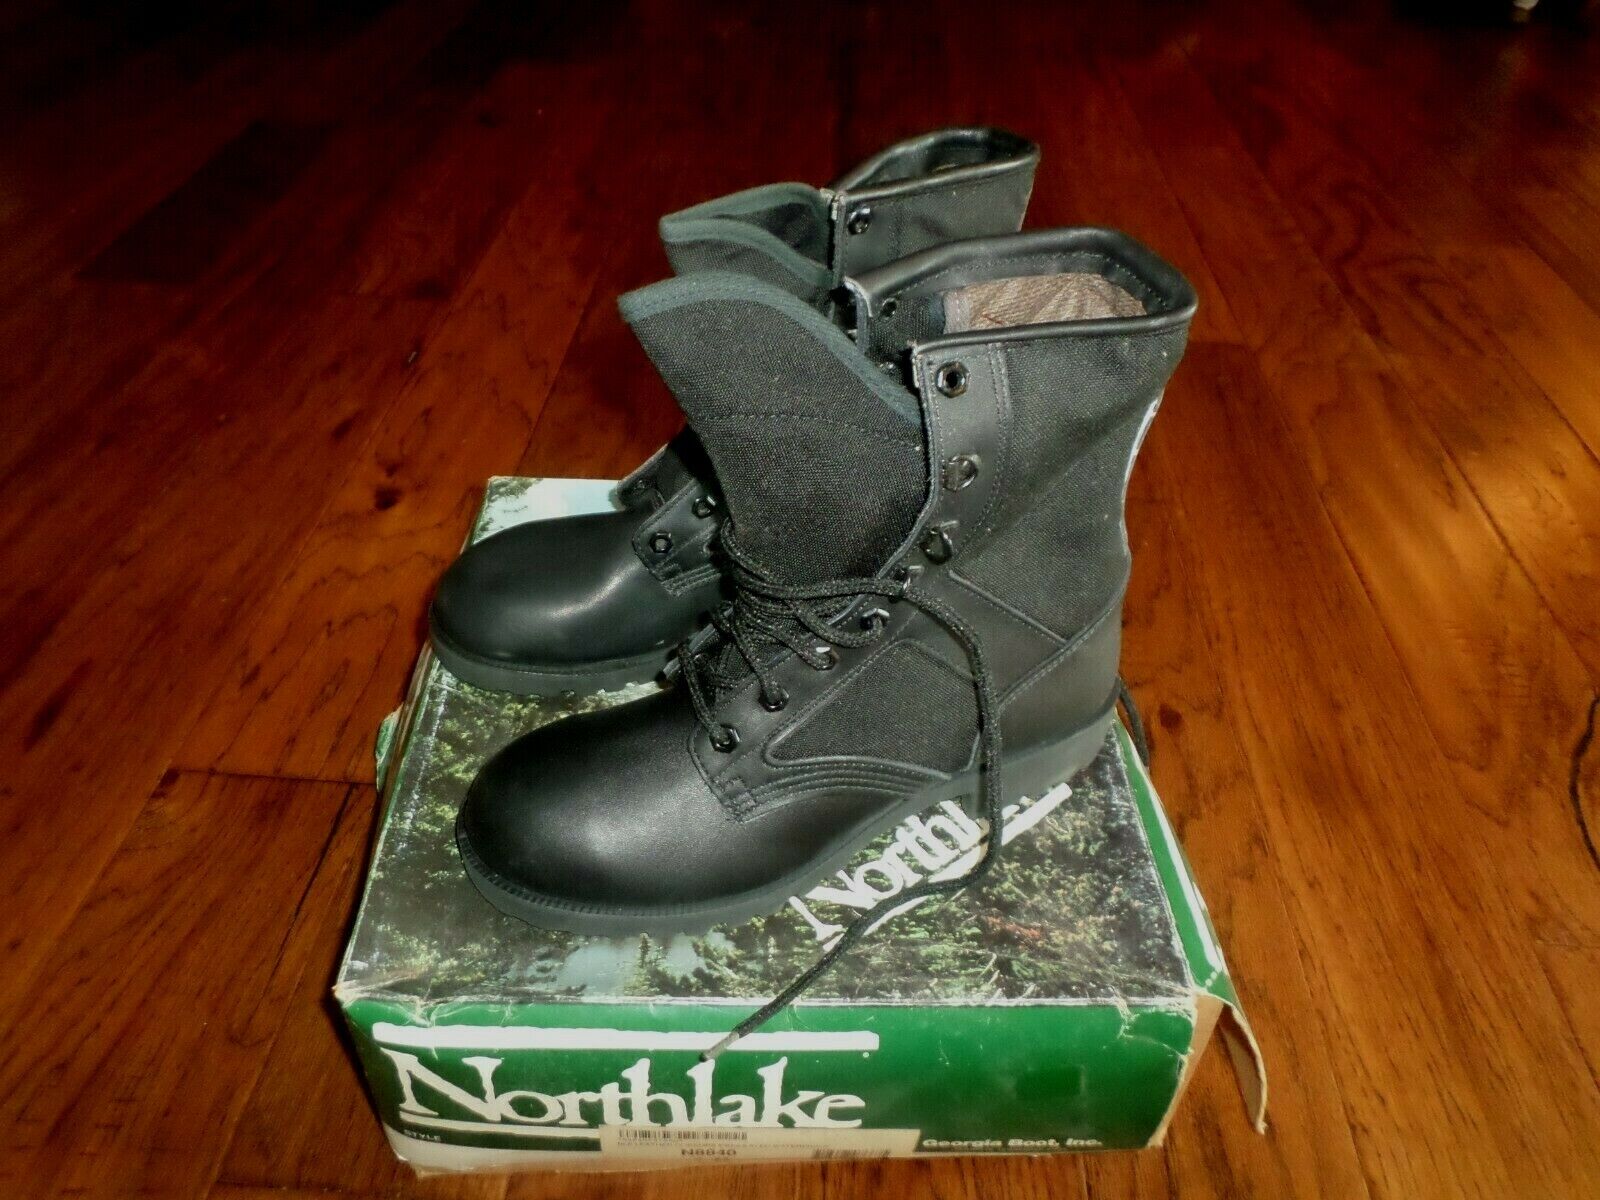 NORTHLAKE GORE-TEX LEATHER BOOTS THINSULATE WATERPROOF SIZE 8 M BLACK